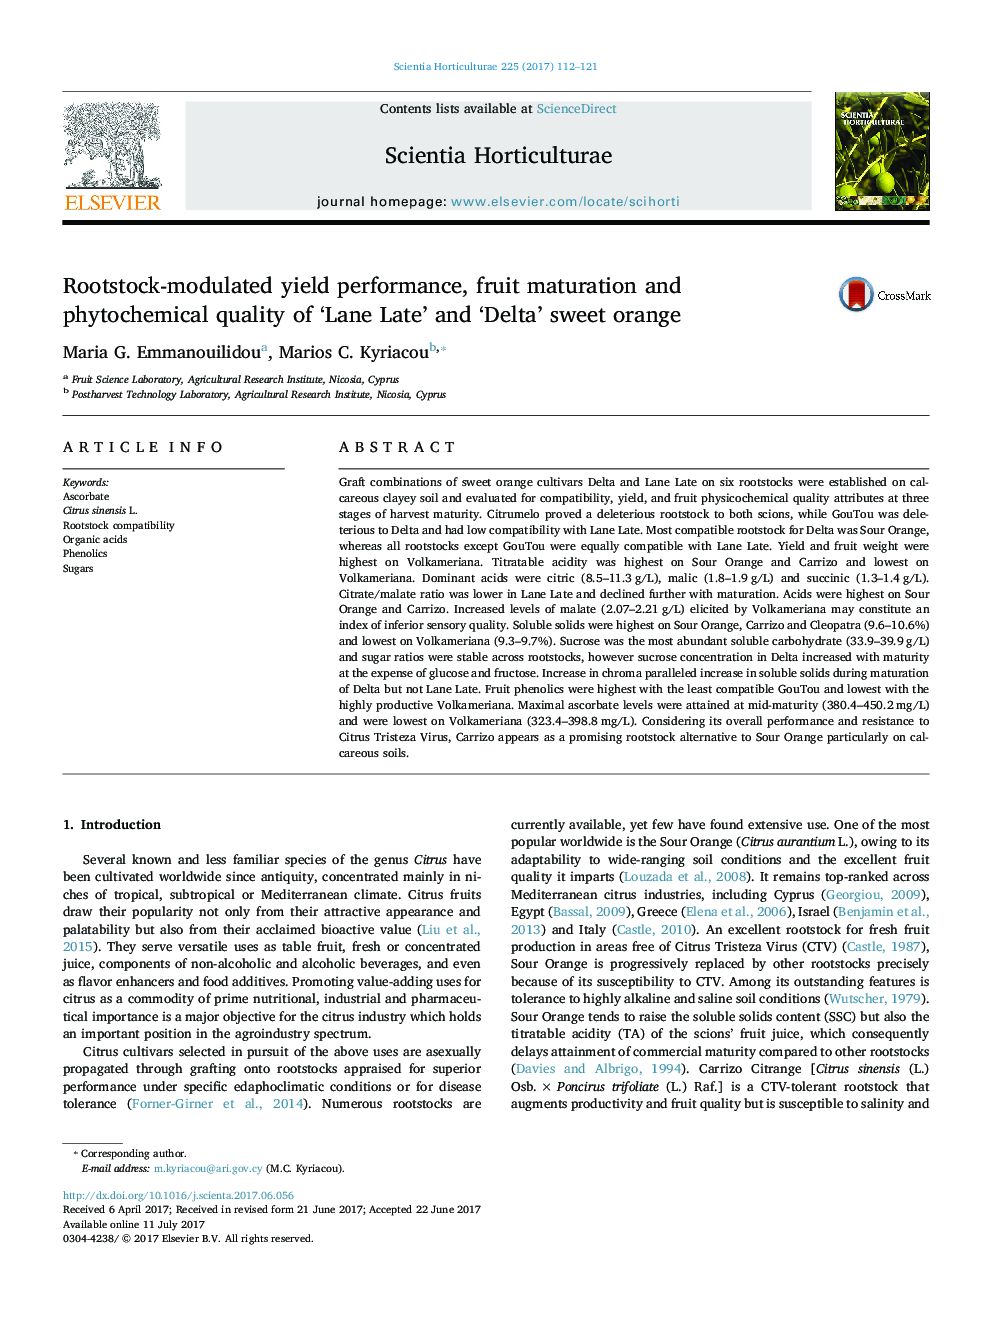 Rootstock-modulated yield performance, fruit maturation and phytochemical quality of 'Lane Late' and 'Delta' sweet orange